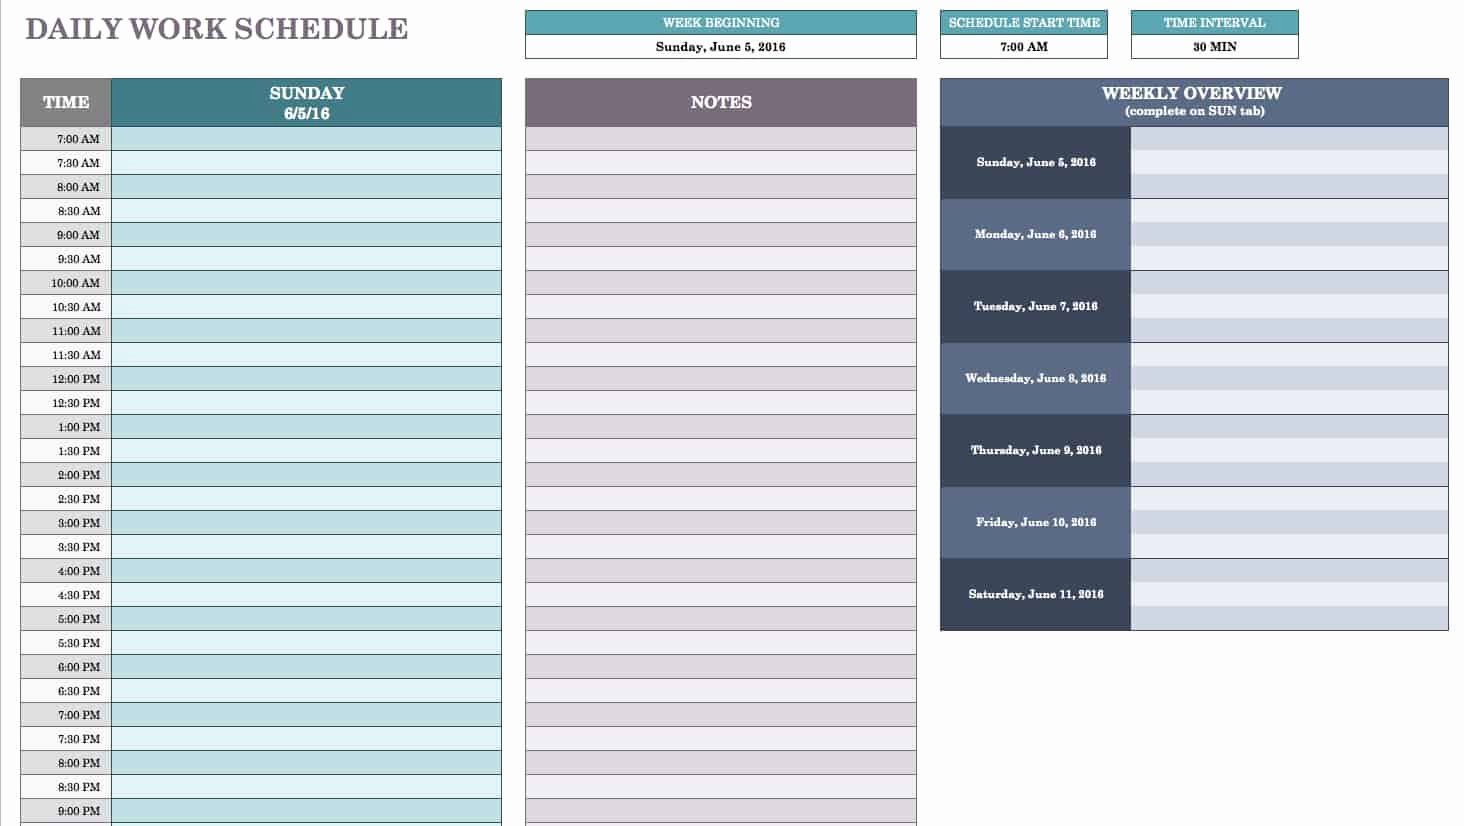 Daily Work Schedule Template Beautiful Free Daily Schedule Templates for Excel Smartsheet